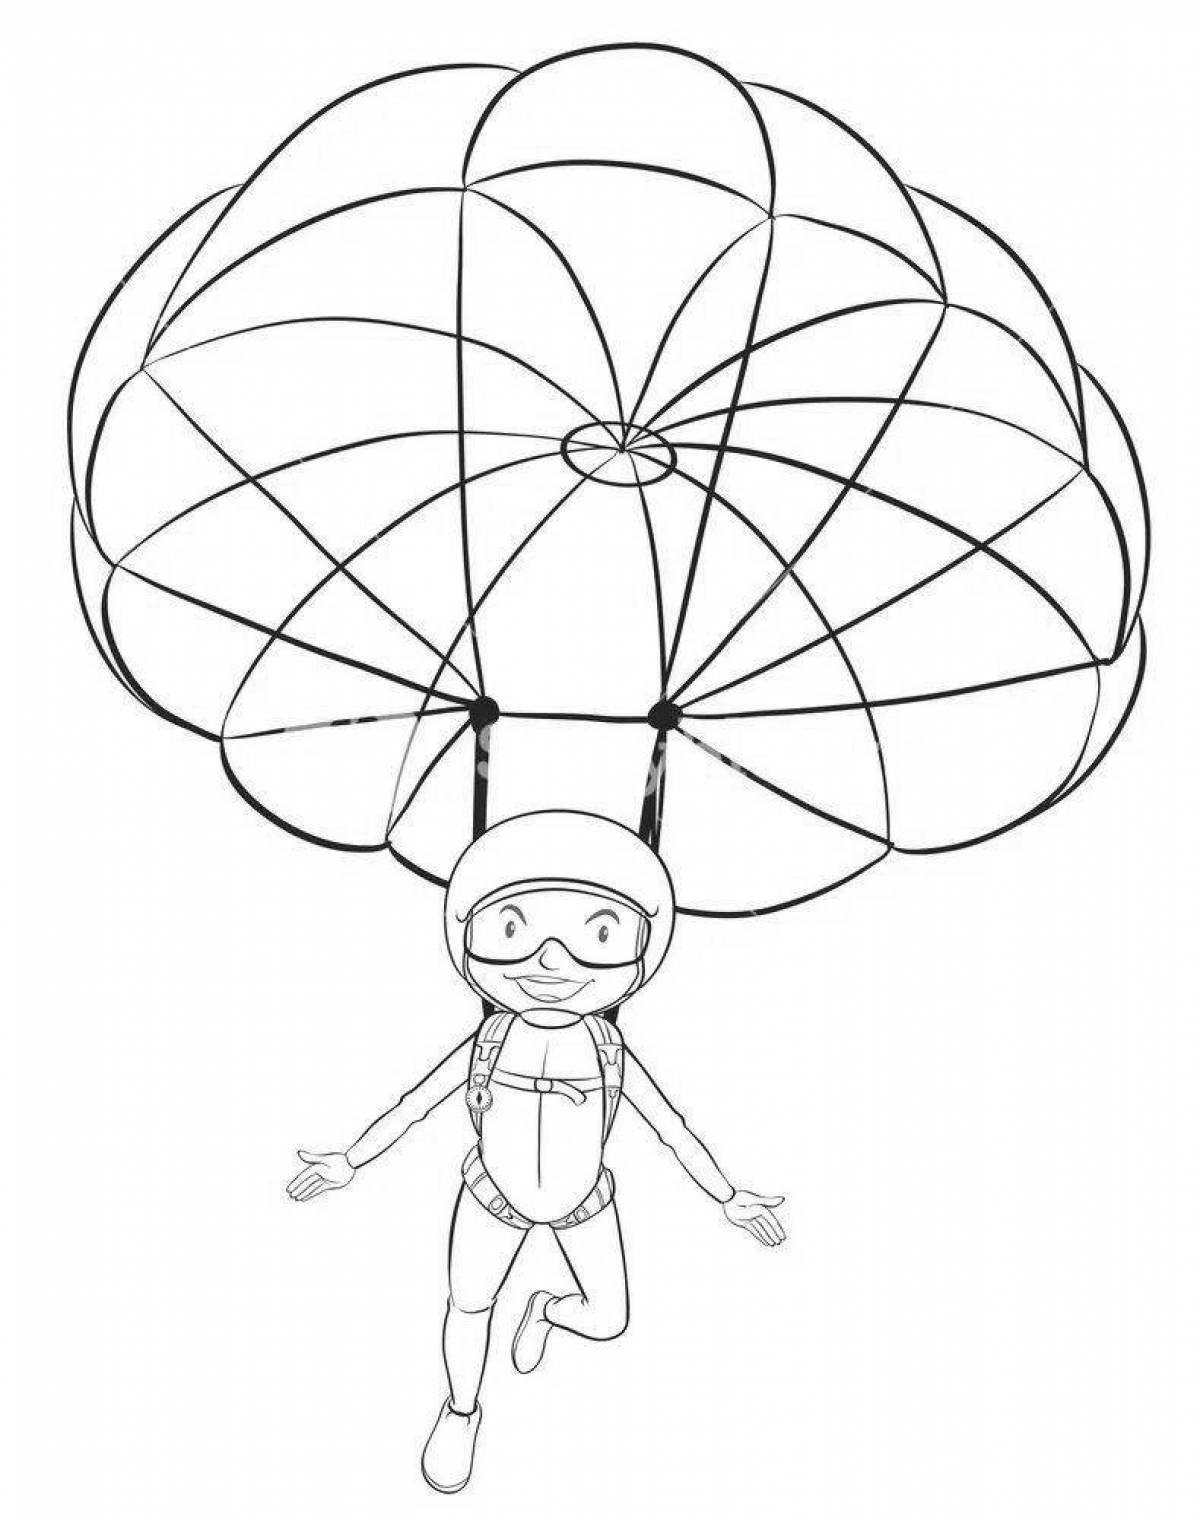 Animated baby parachute coloring page